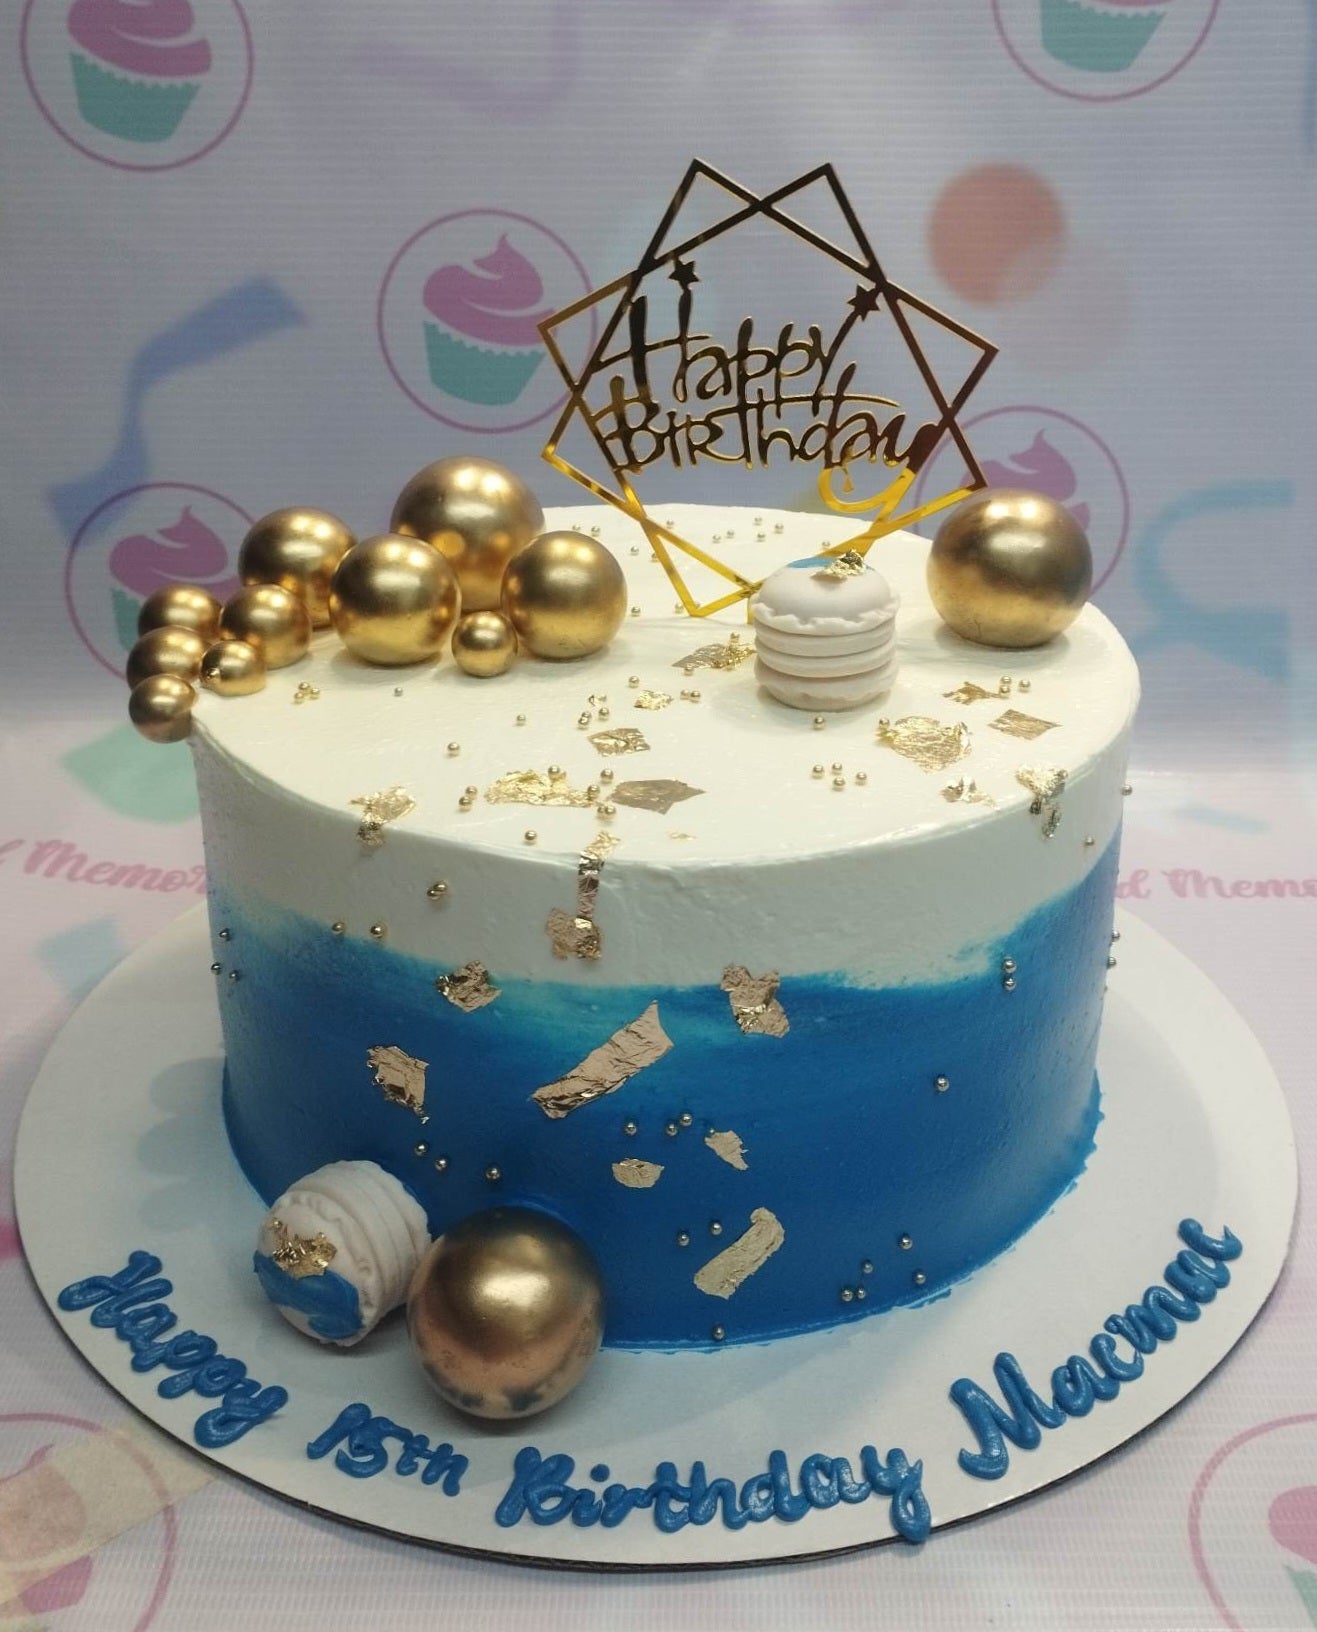 This customized Dad Cake is the perfect gift for the special man in your life. It features a light blue icing background decorated with golden streaks, stars, and spheres. The top is adorned with elegant macarons that create a beautiful contrast of colors and textures. Perfect for birthdays, Father's Day and any special occasion.